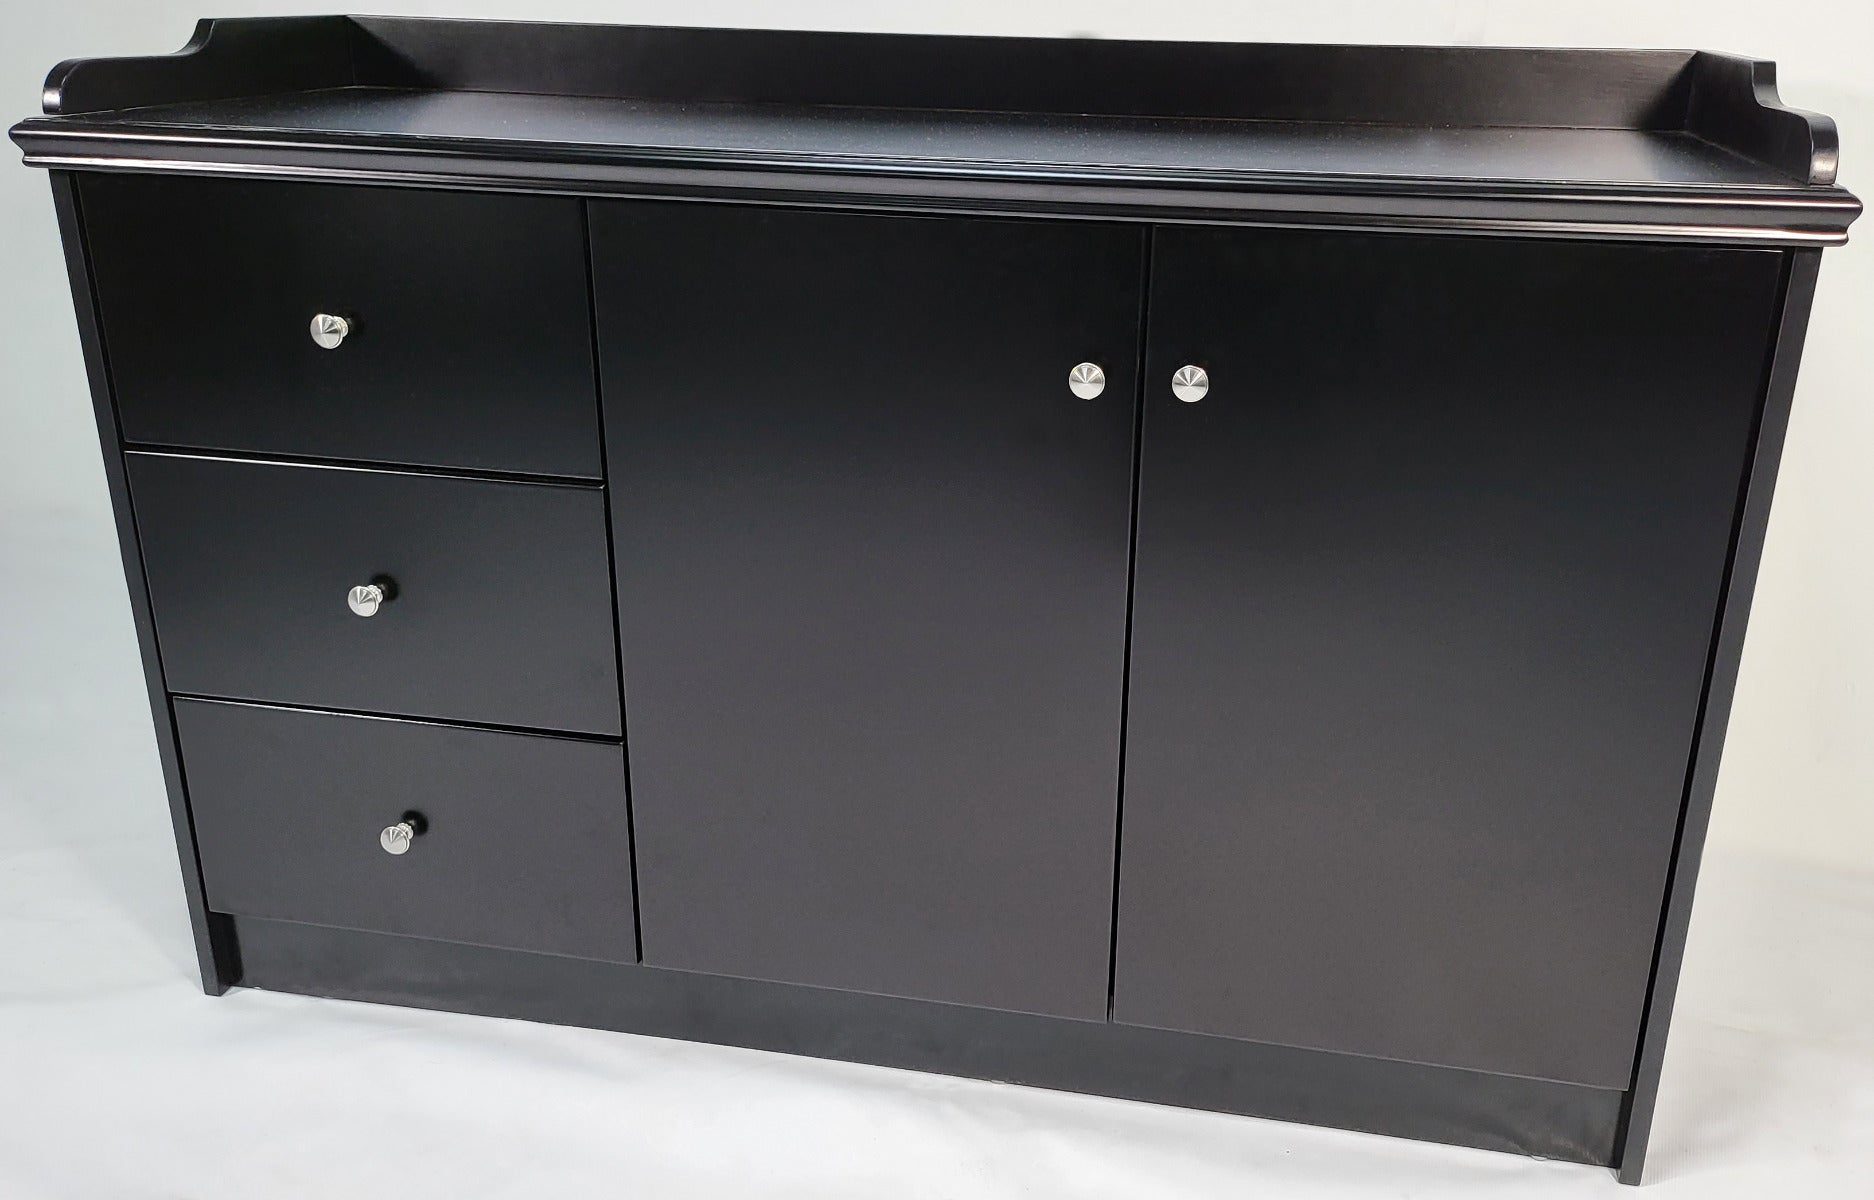 120cm Wide Black Cupboard with Integrated Drawers - 2K01 UK